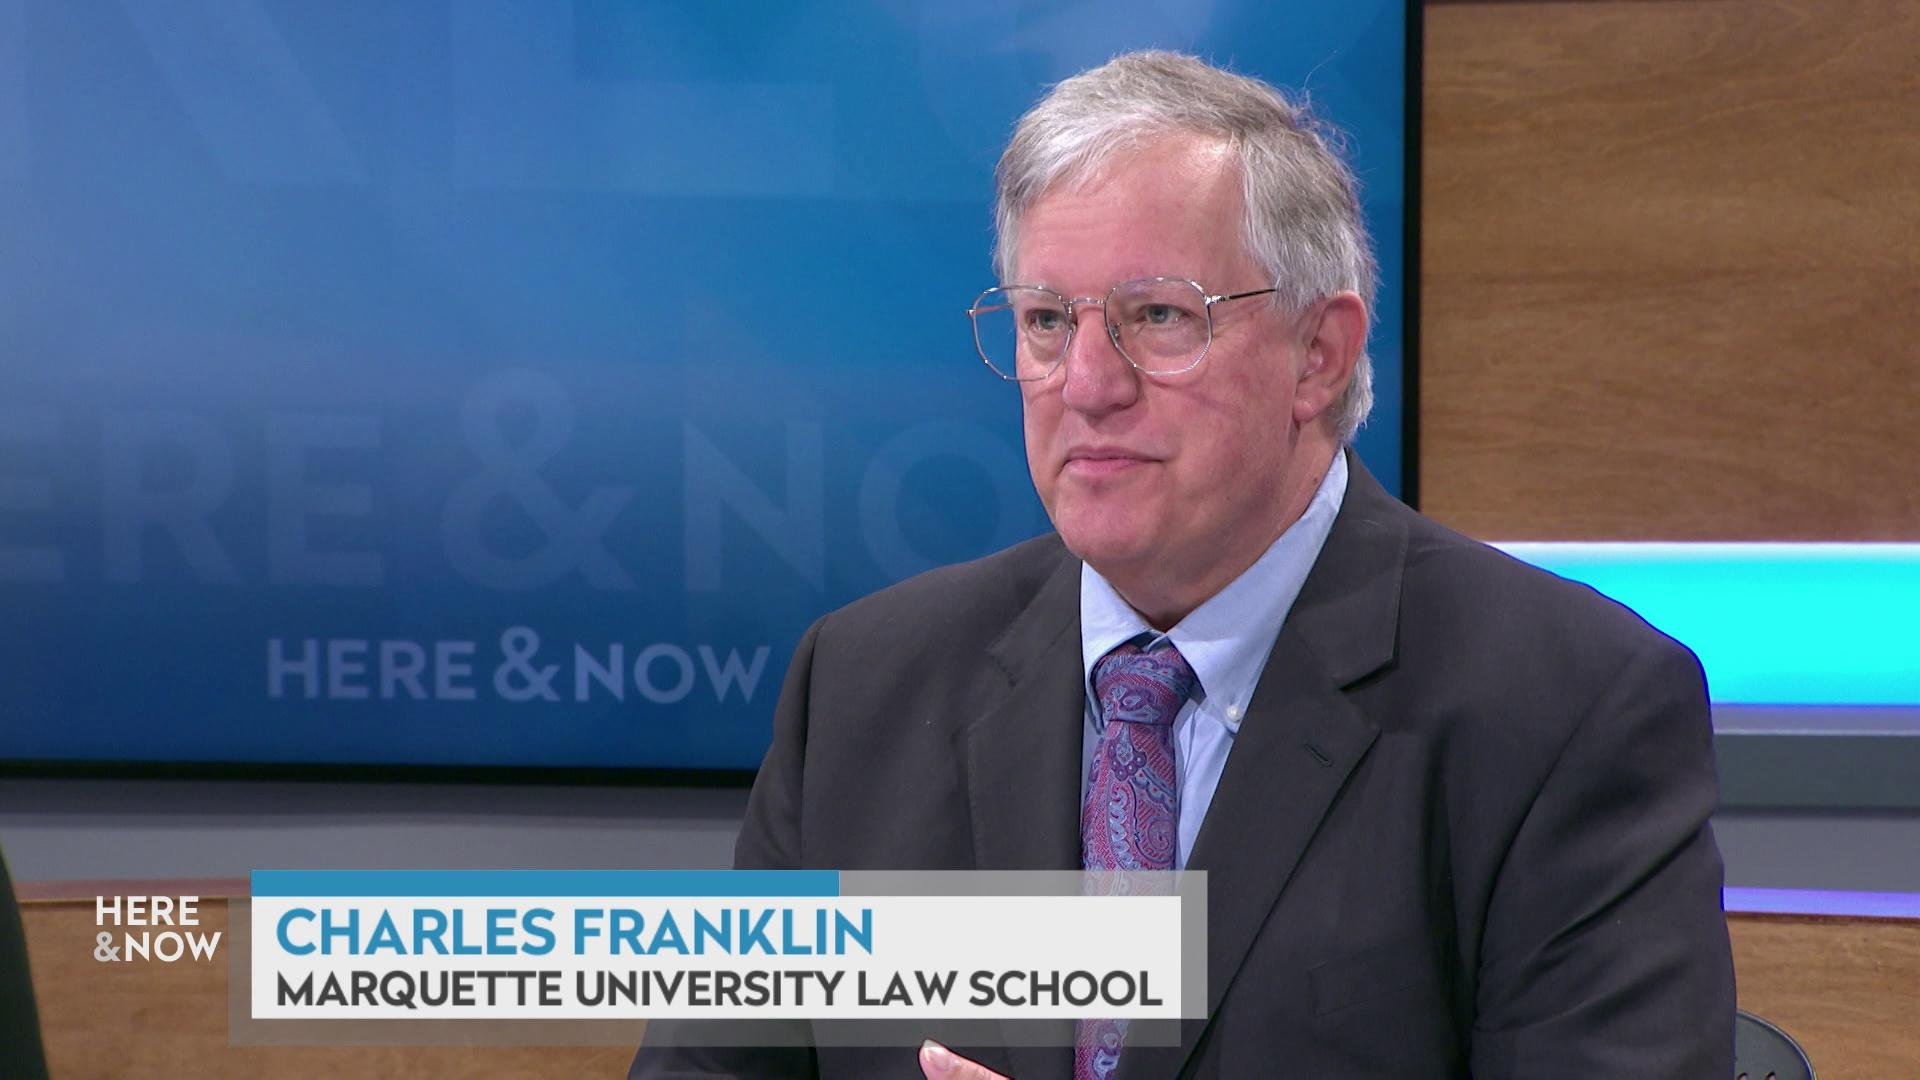 A still image shows Charles Franklin seated at the 'Here & Now' set featuring wood paneling, with a graphic at bottom reading 'Charles Franklin' and 'Marquette University Law School.'